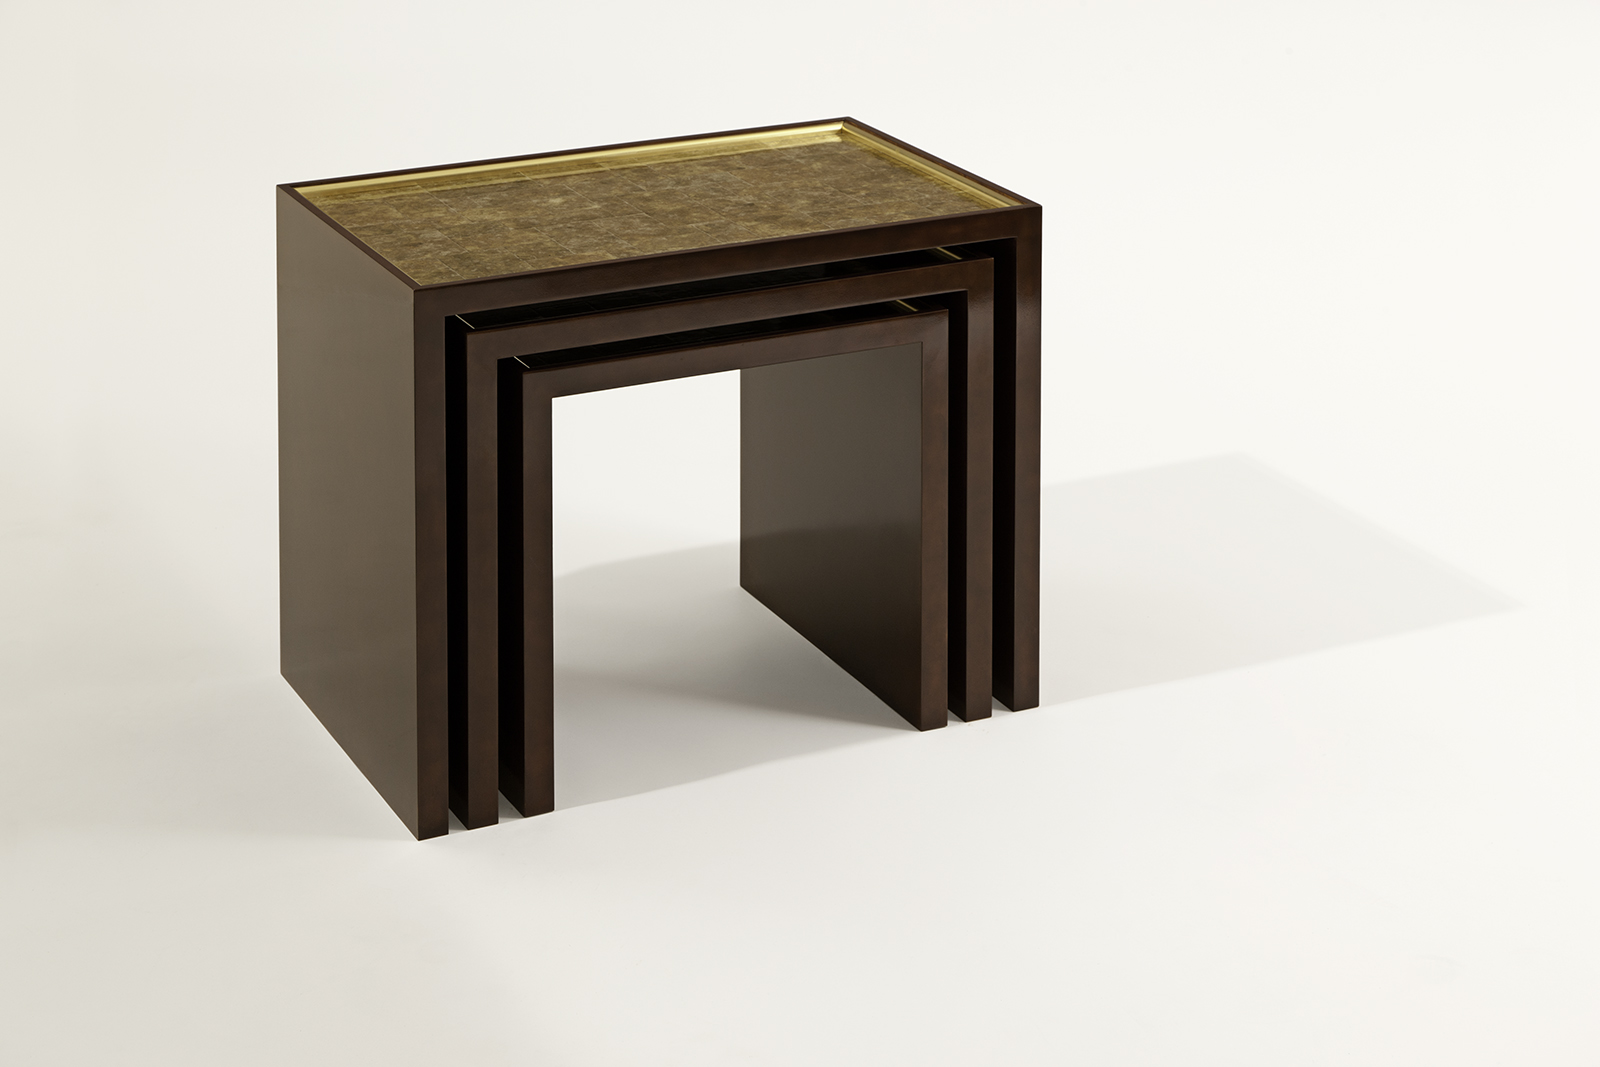 Nesting Tables In Mica, Tone-on-tone Lacquer & Gilded Bronze